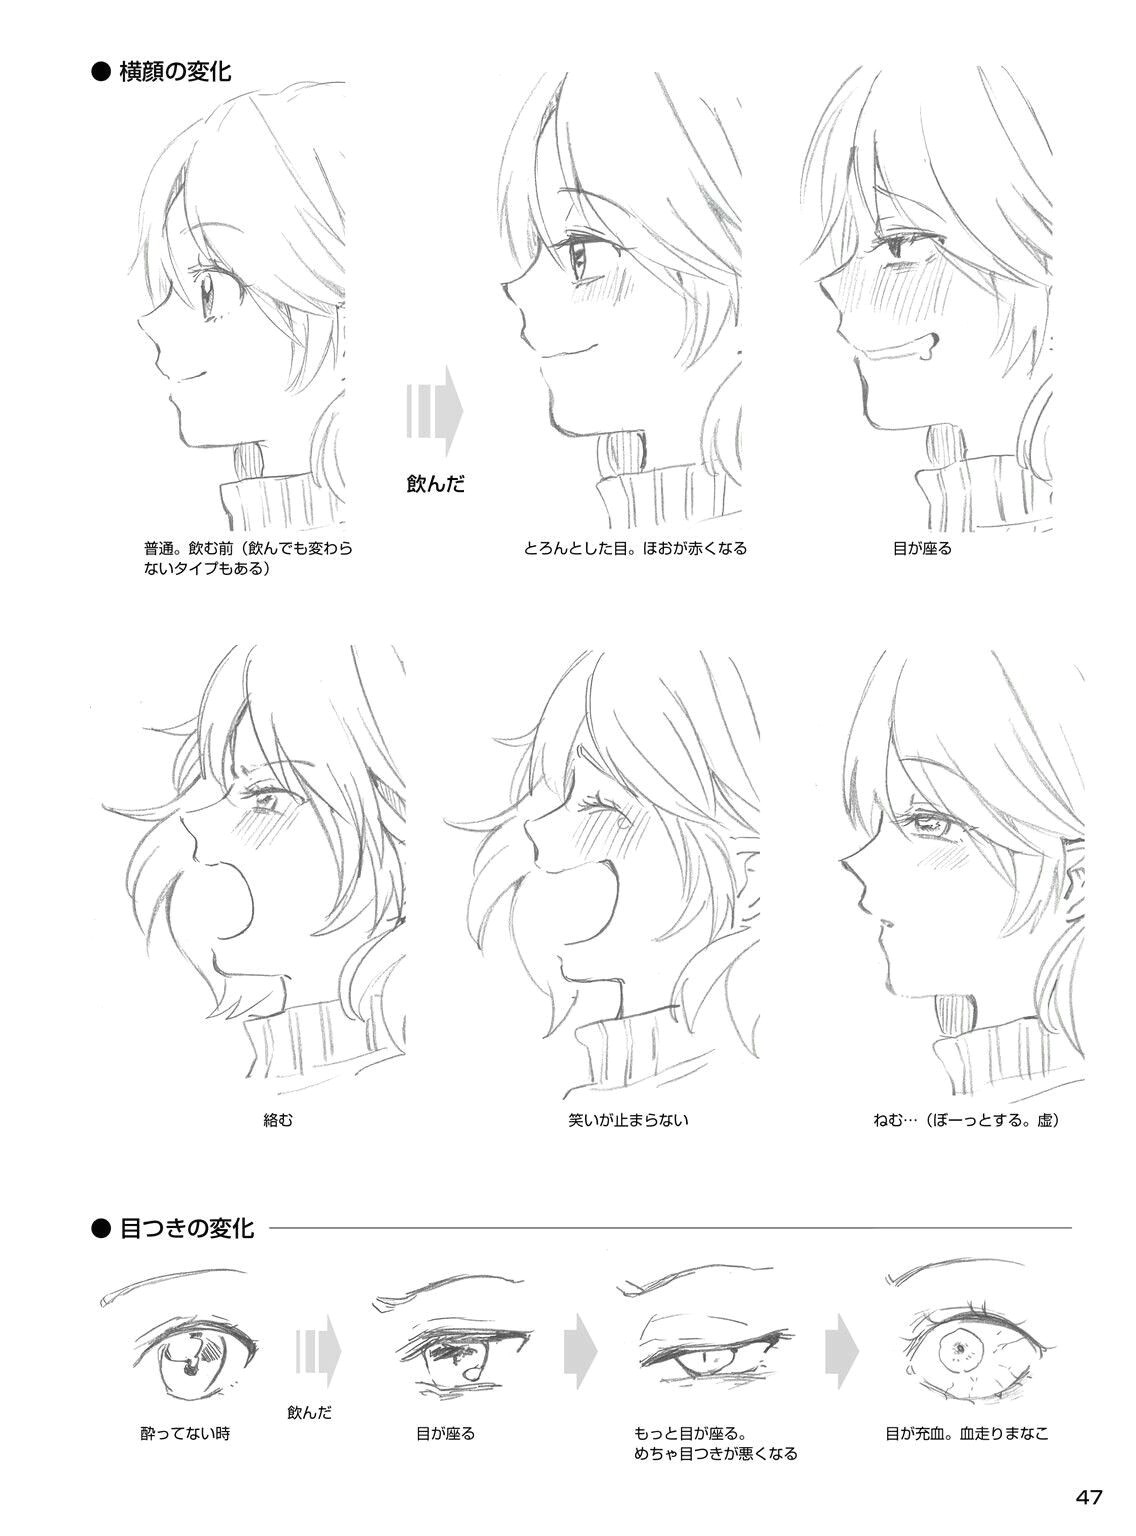 Drawing A Anime Face Pin by Wolf Drawing64 On Anime Manga Art Drawing Tips Pinterest